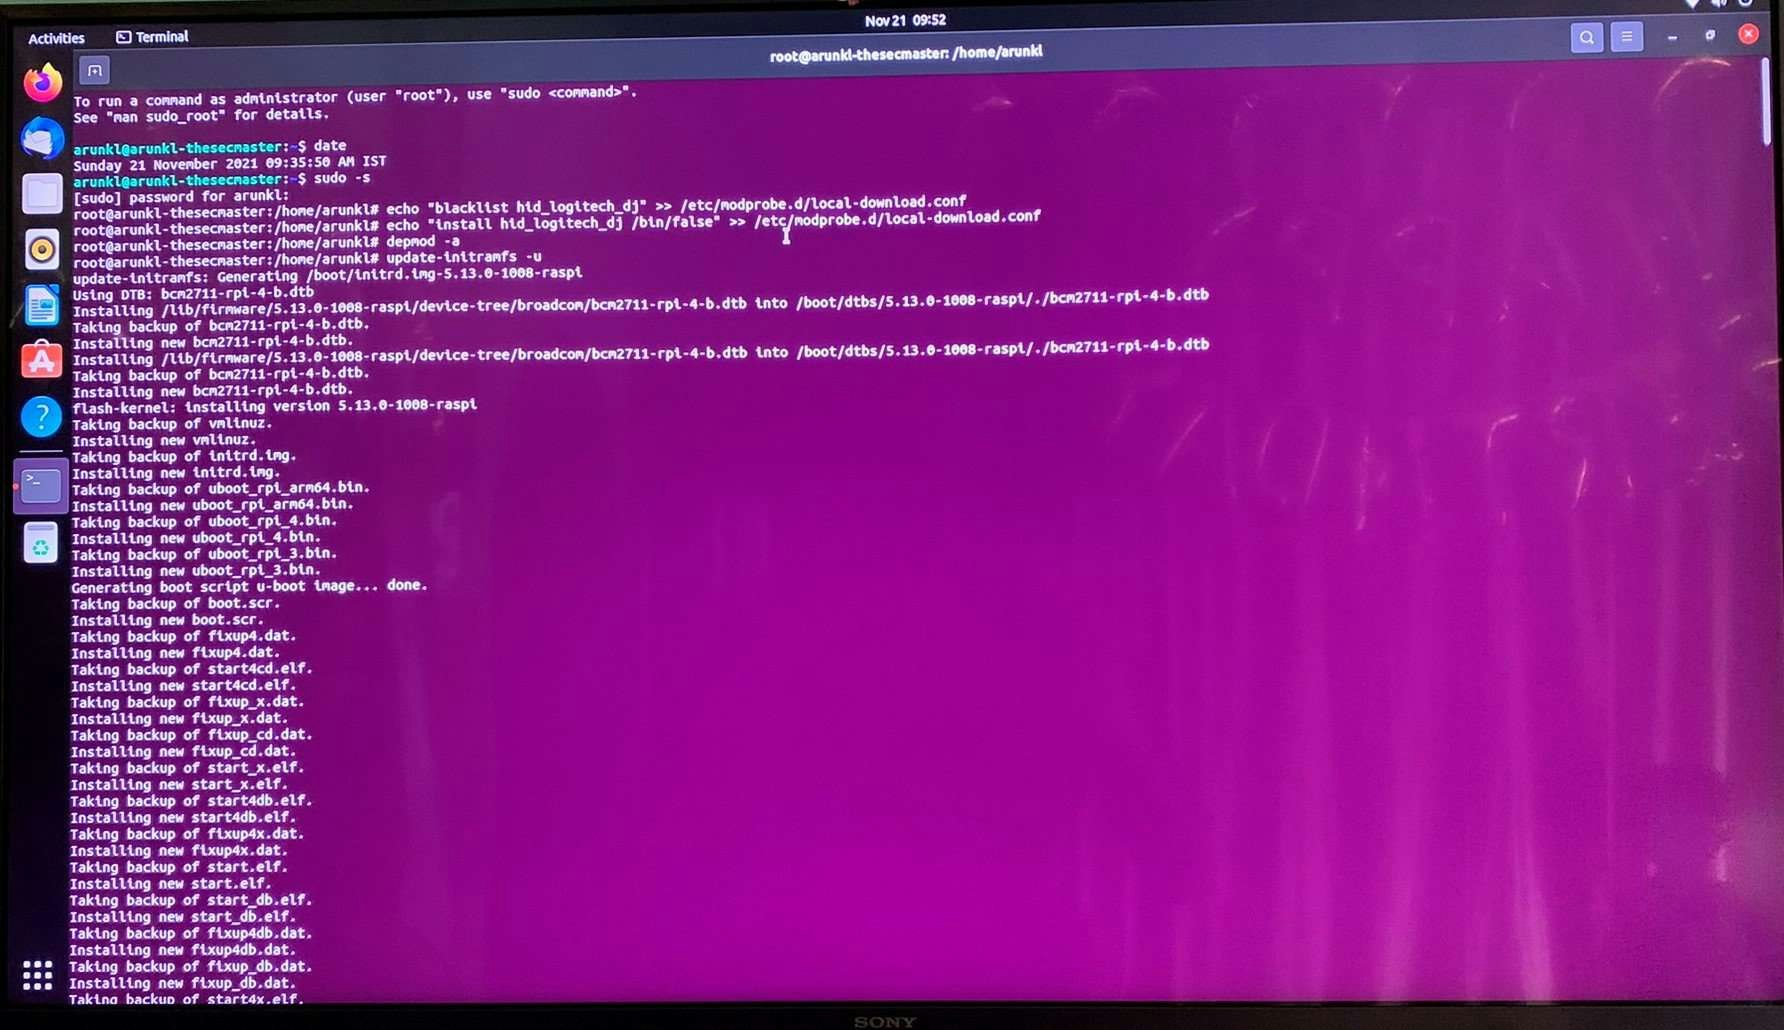 How To Fix Typing Issue In Ubuntu On Raspberry Pi